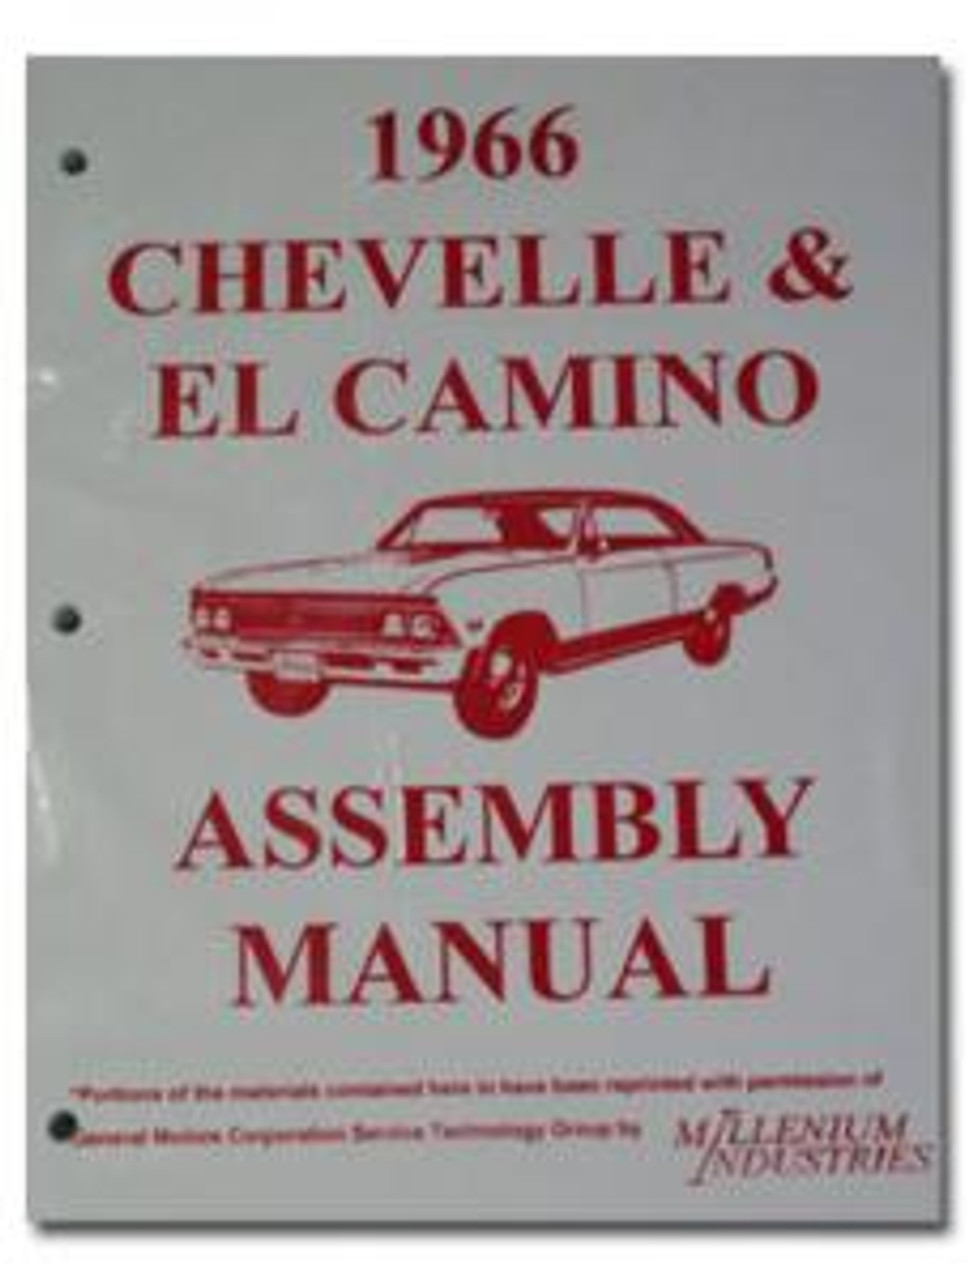 1966 Assembly Manual (book)